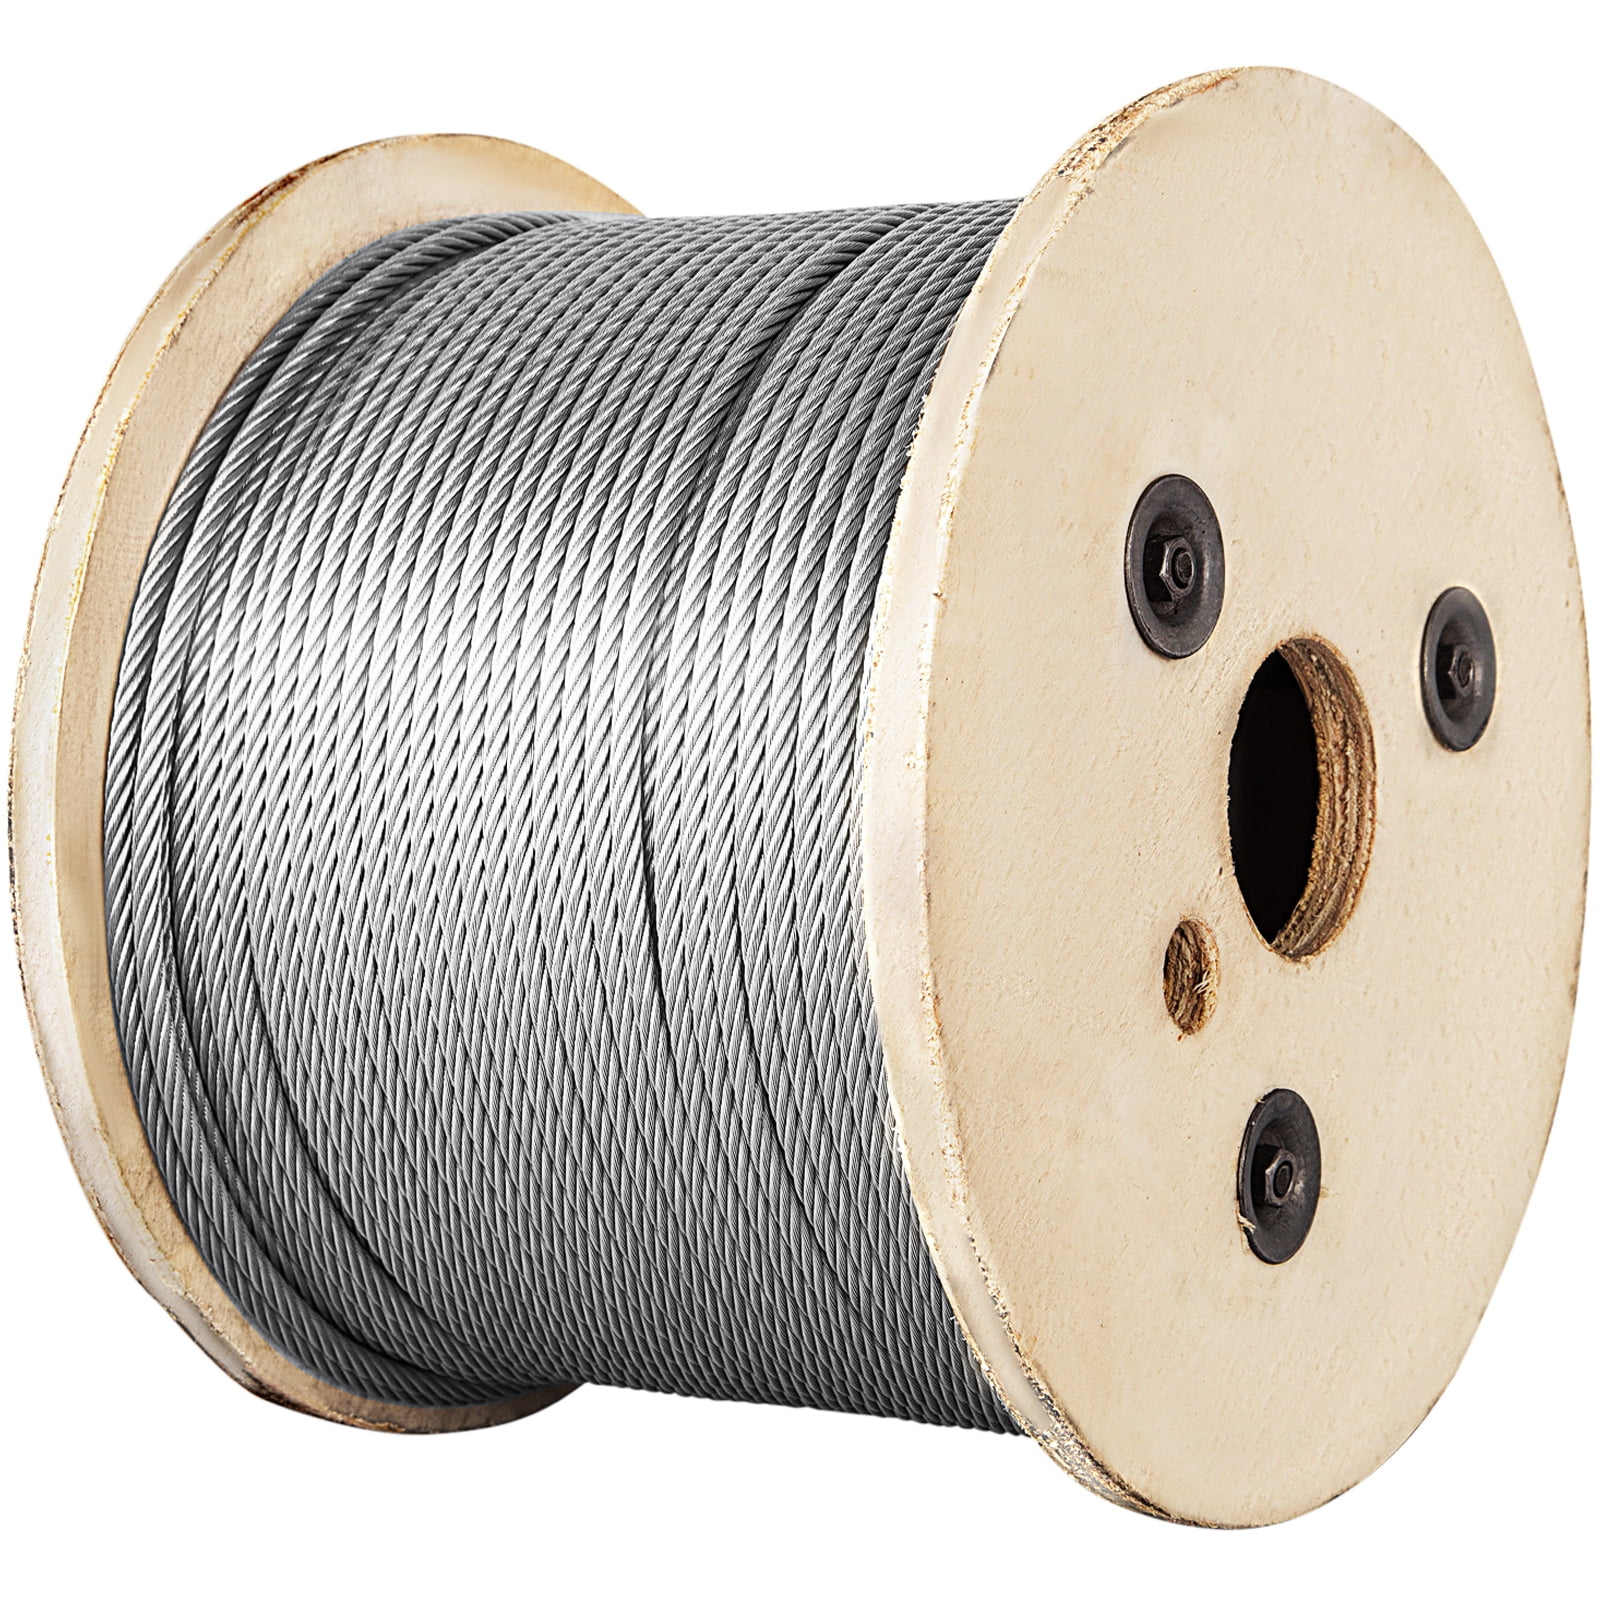 200 ft 1x19 3/16" Cable Railing T316 Stainless Steel Wire Rope Cable Strand 